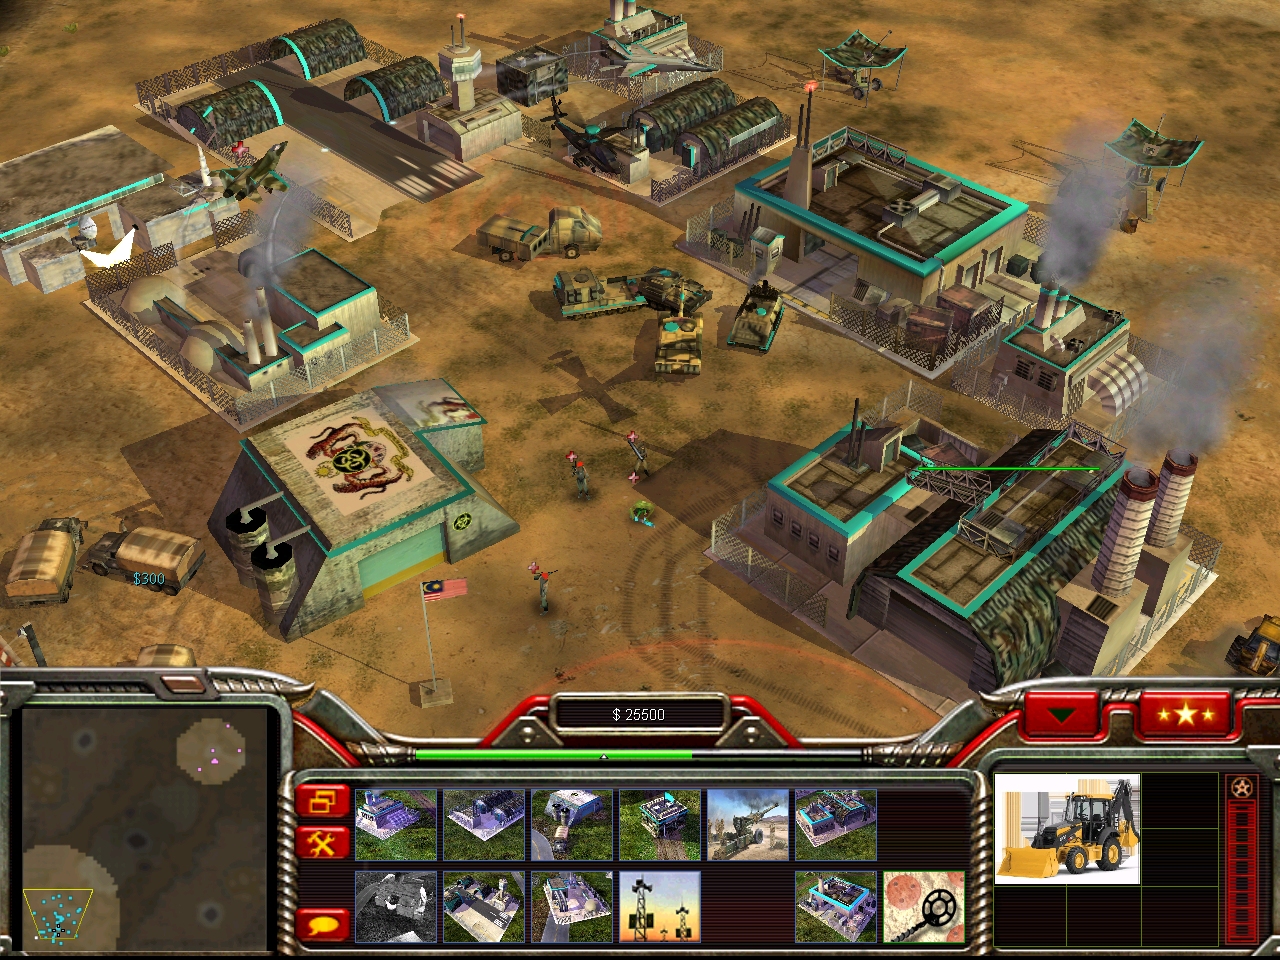 Command and conquer generals zero hour 1.4 trainer